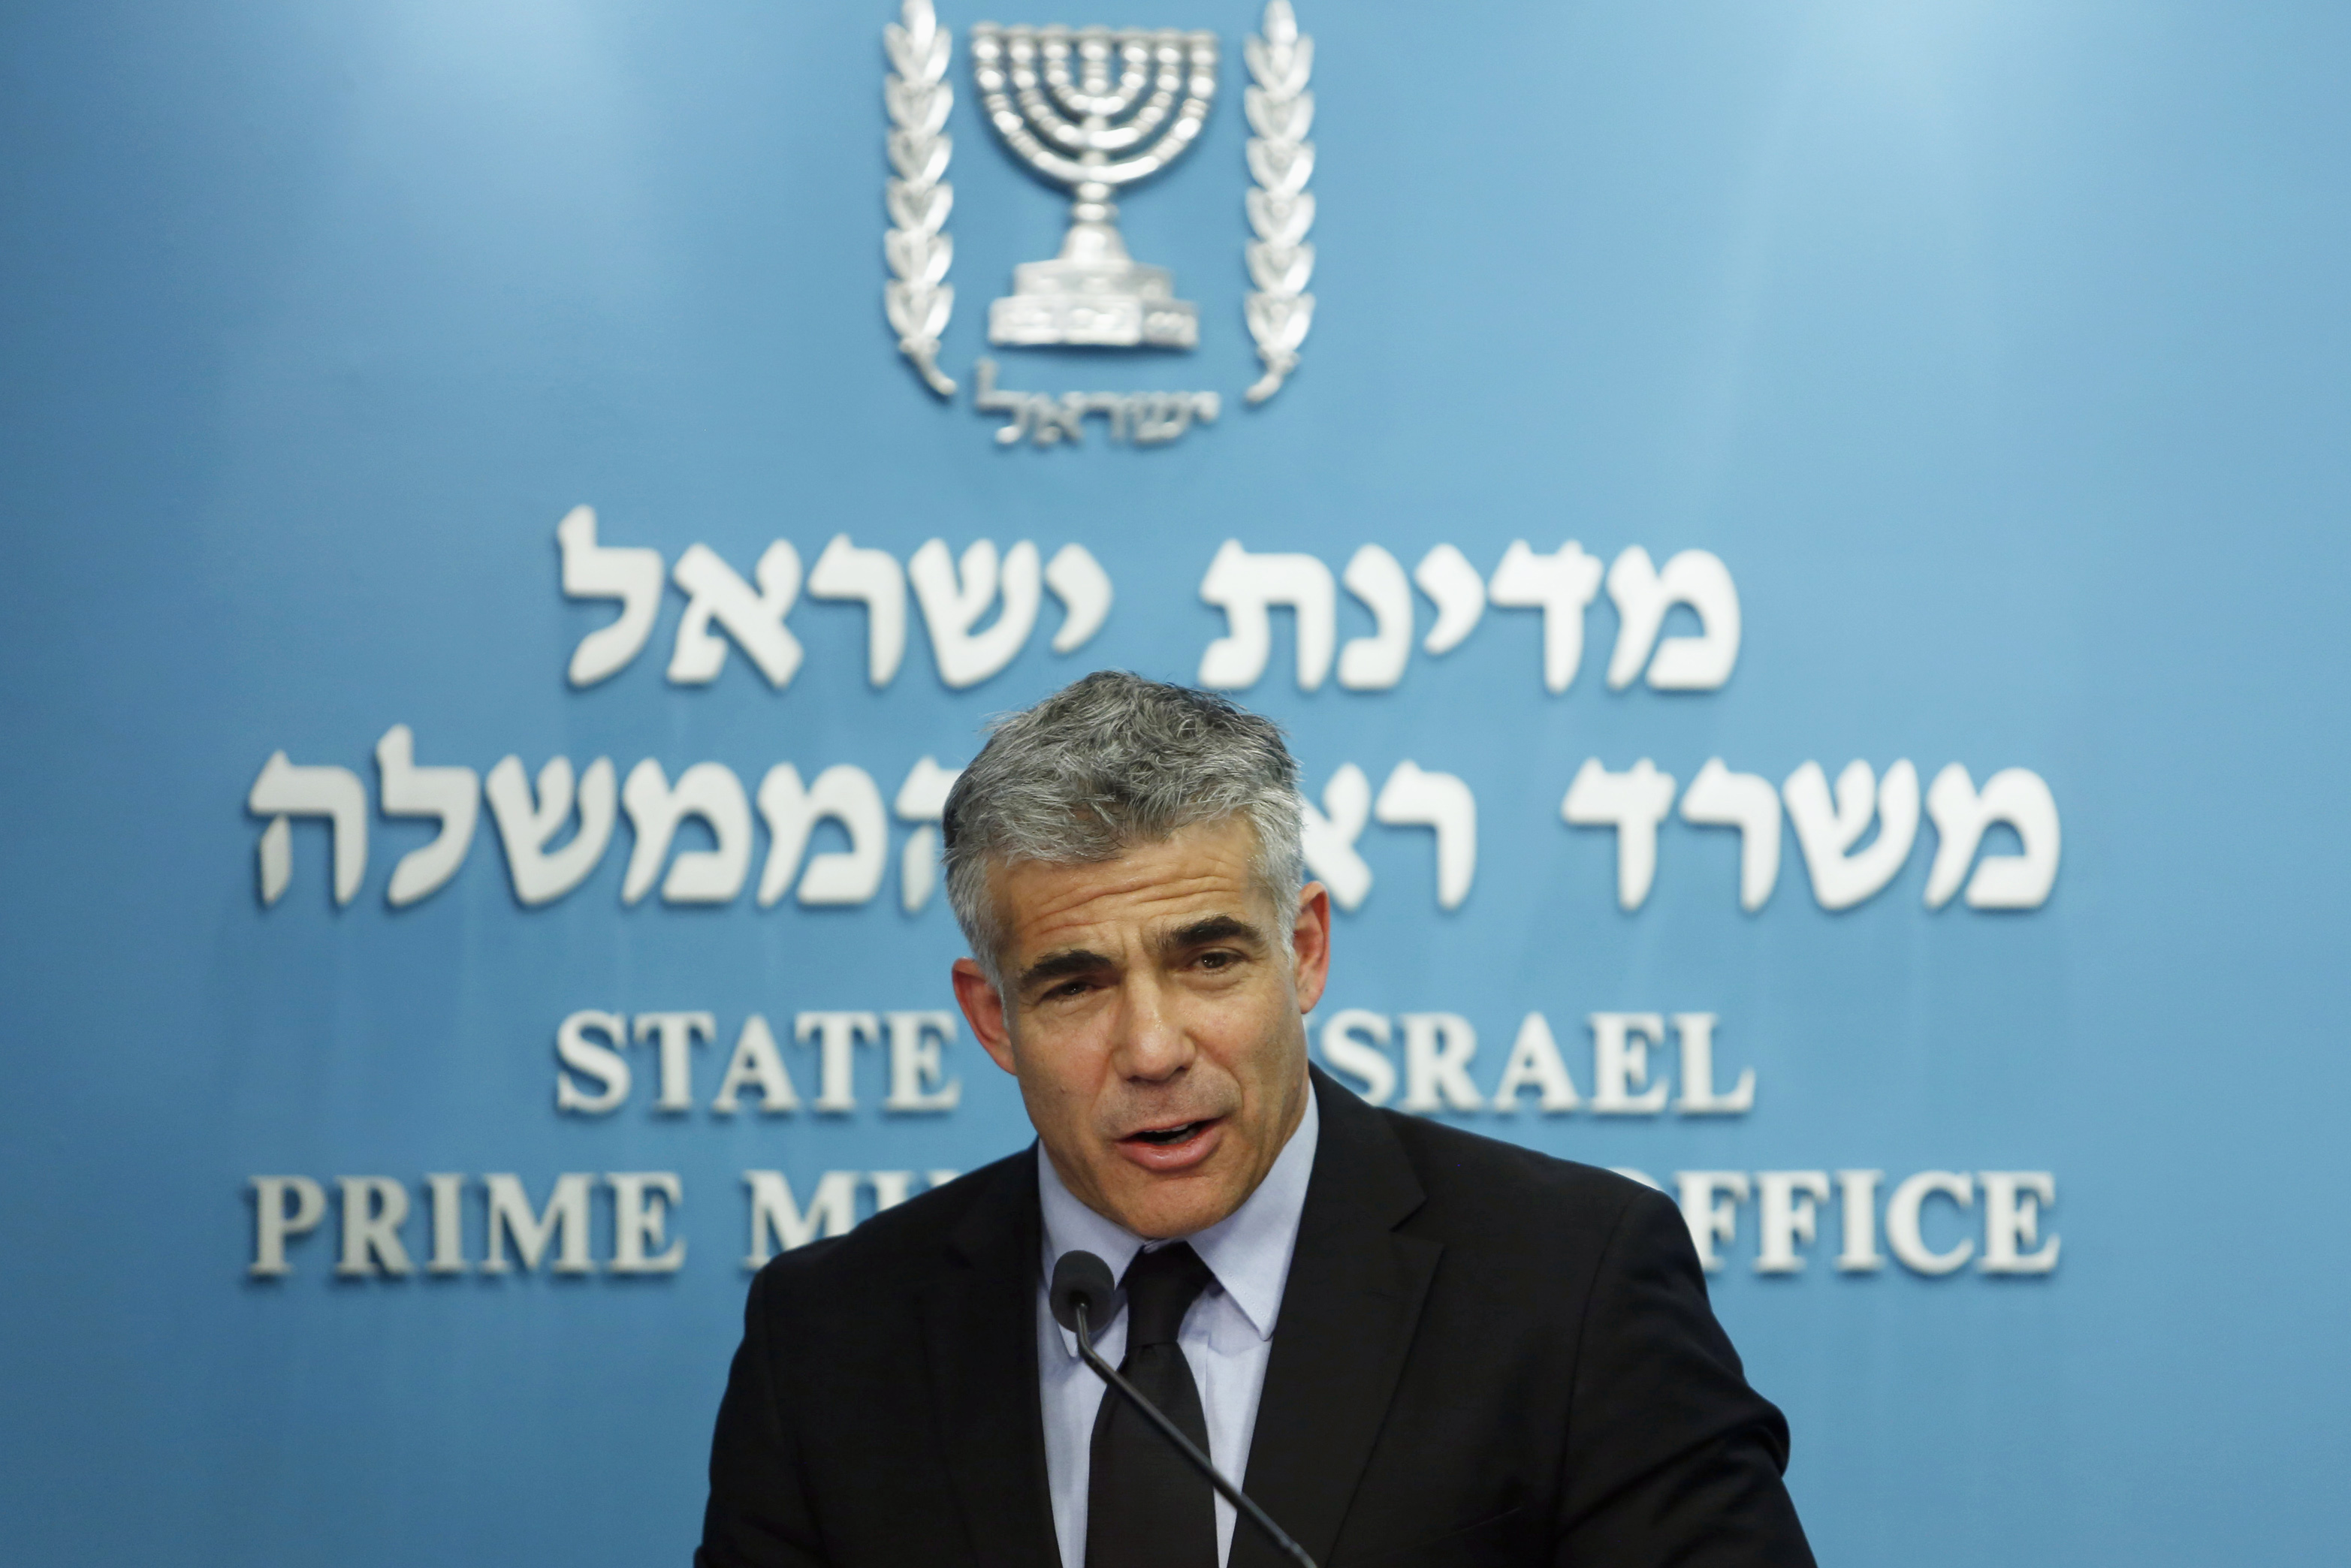 Israel’s Finance Minister Lapid during a joint news conference in Jerusalem